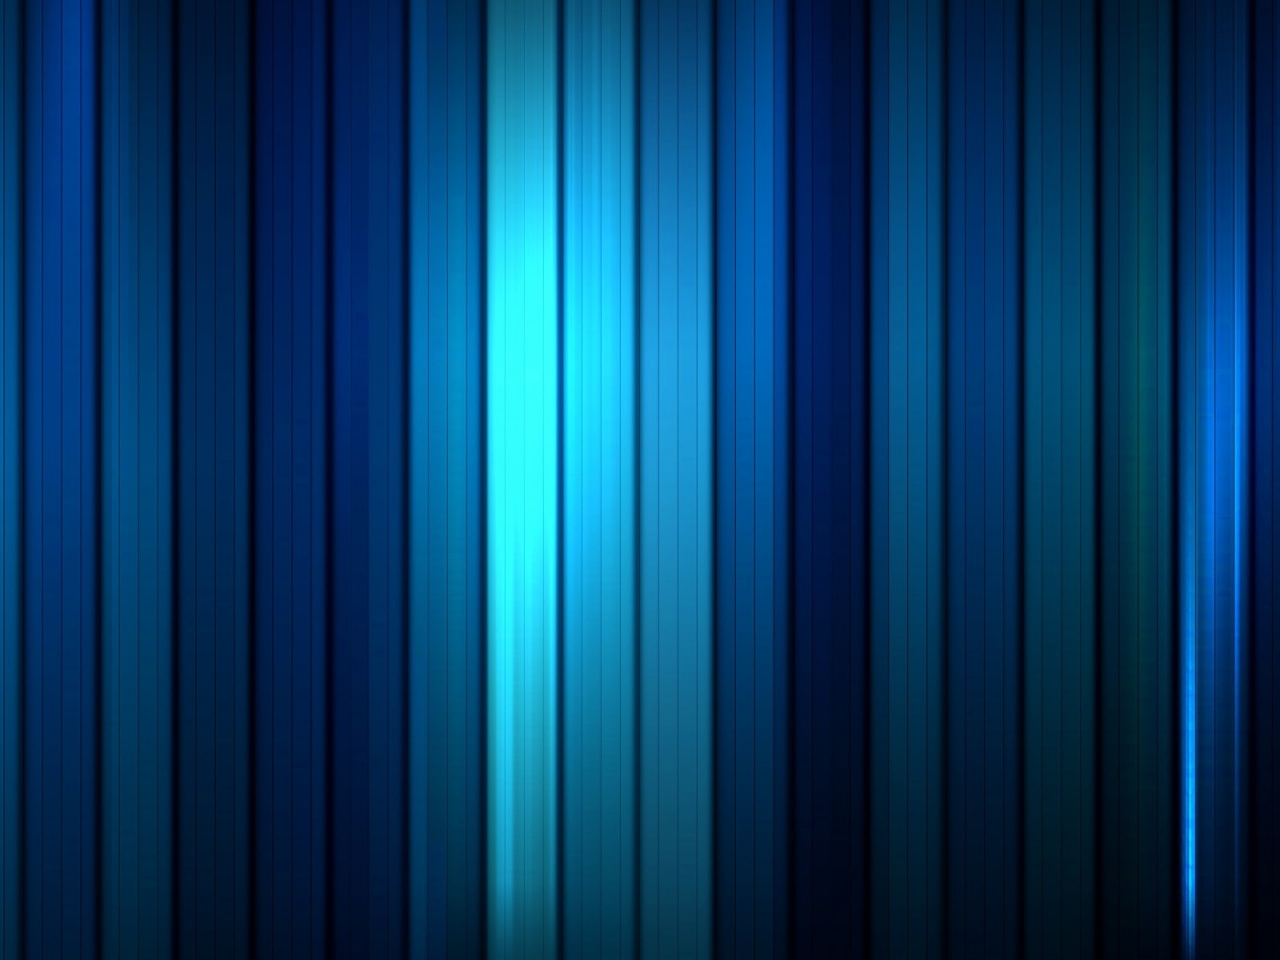 Motion Stripes for 1280 x 960 resolution